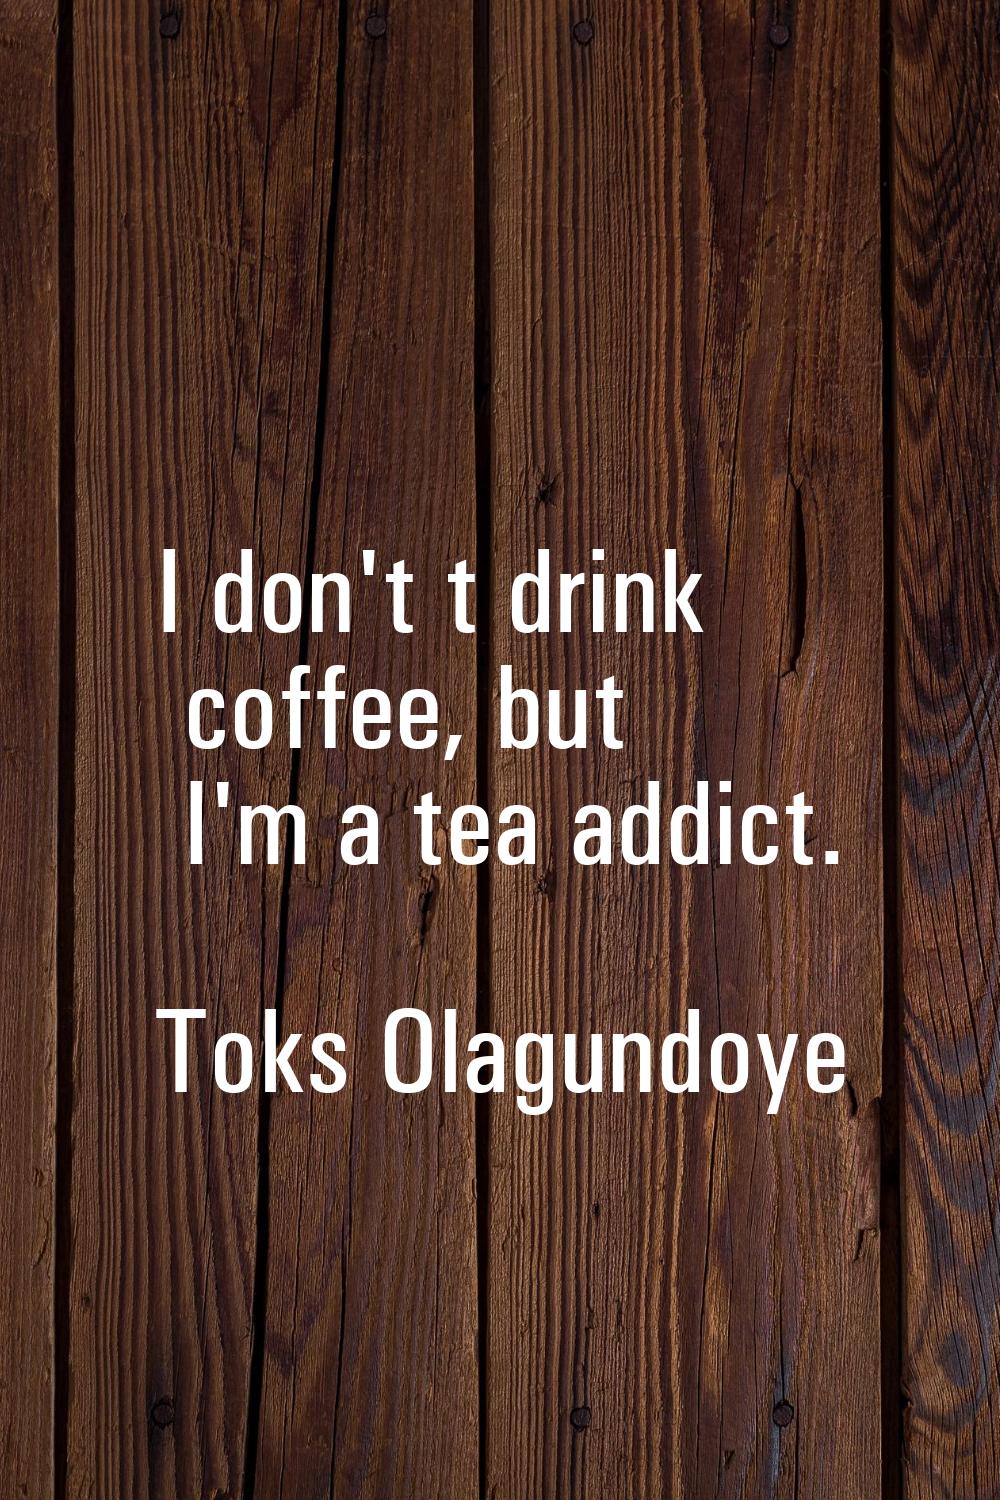 I don't t drink coffee, but I'm a tea addict.